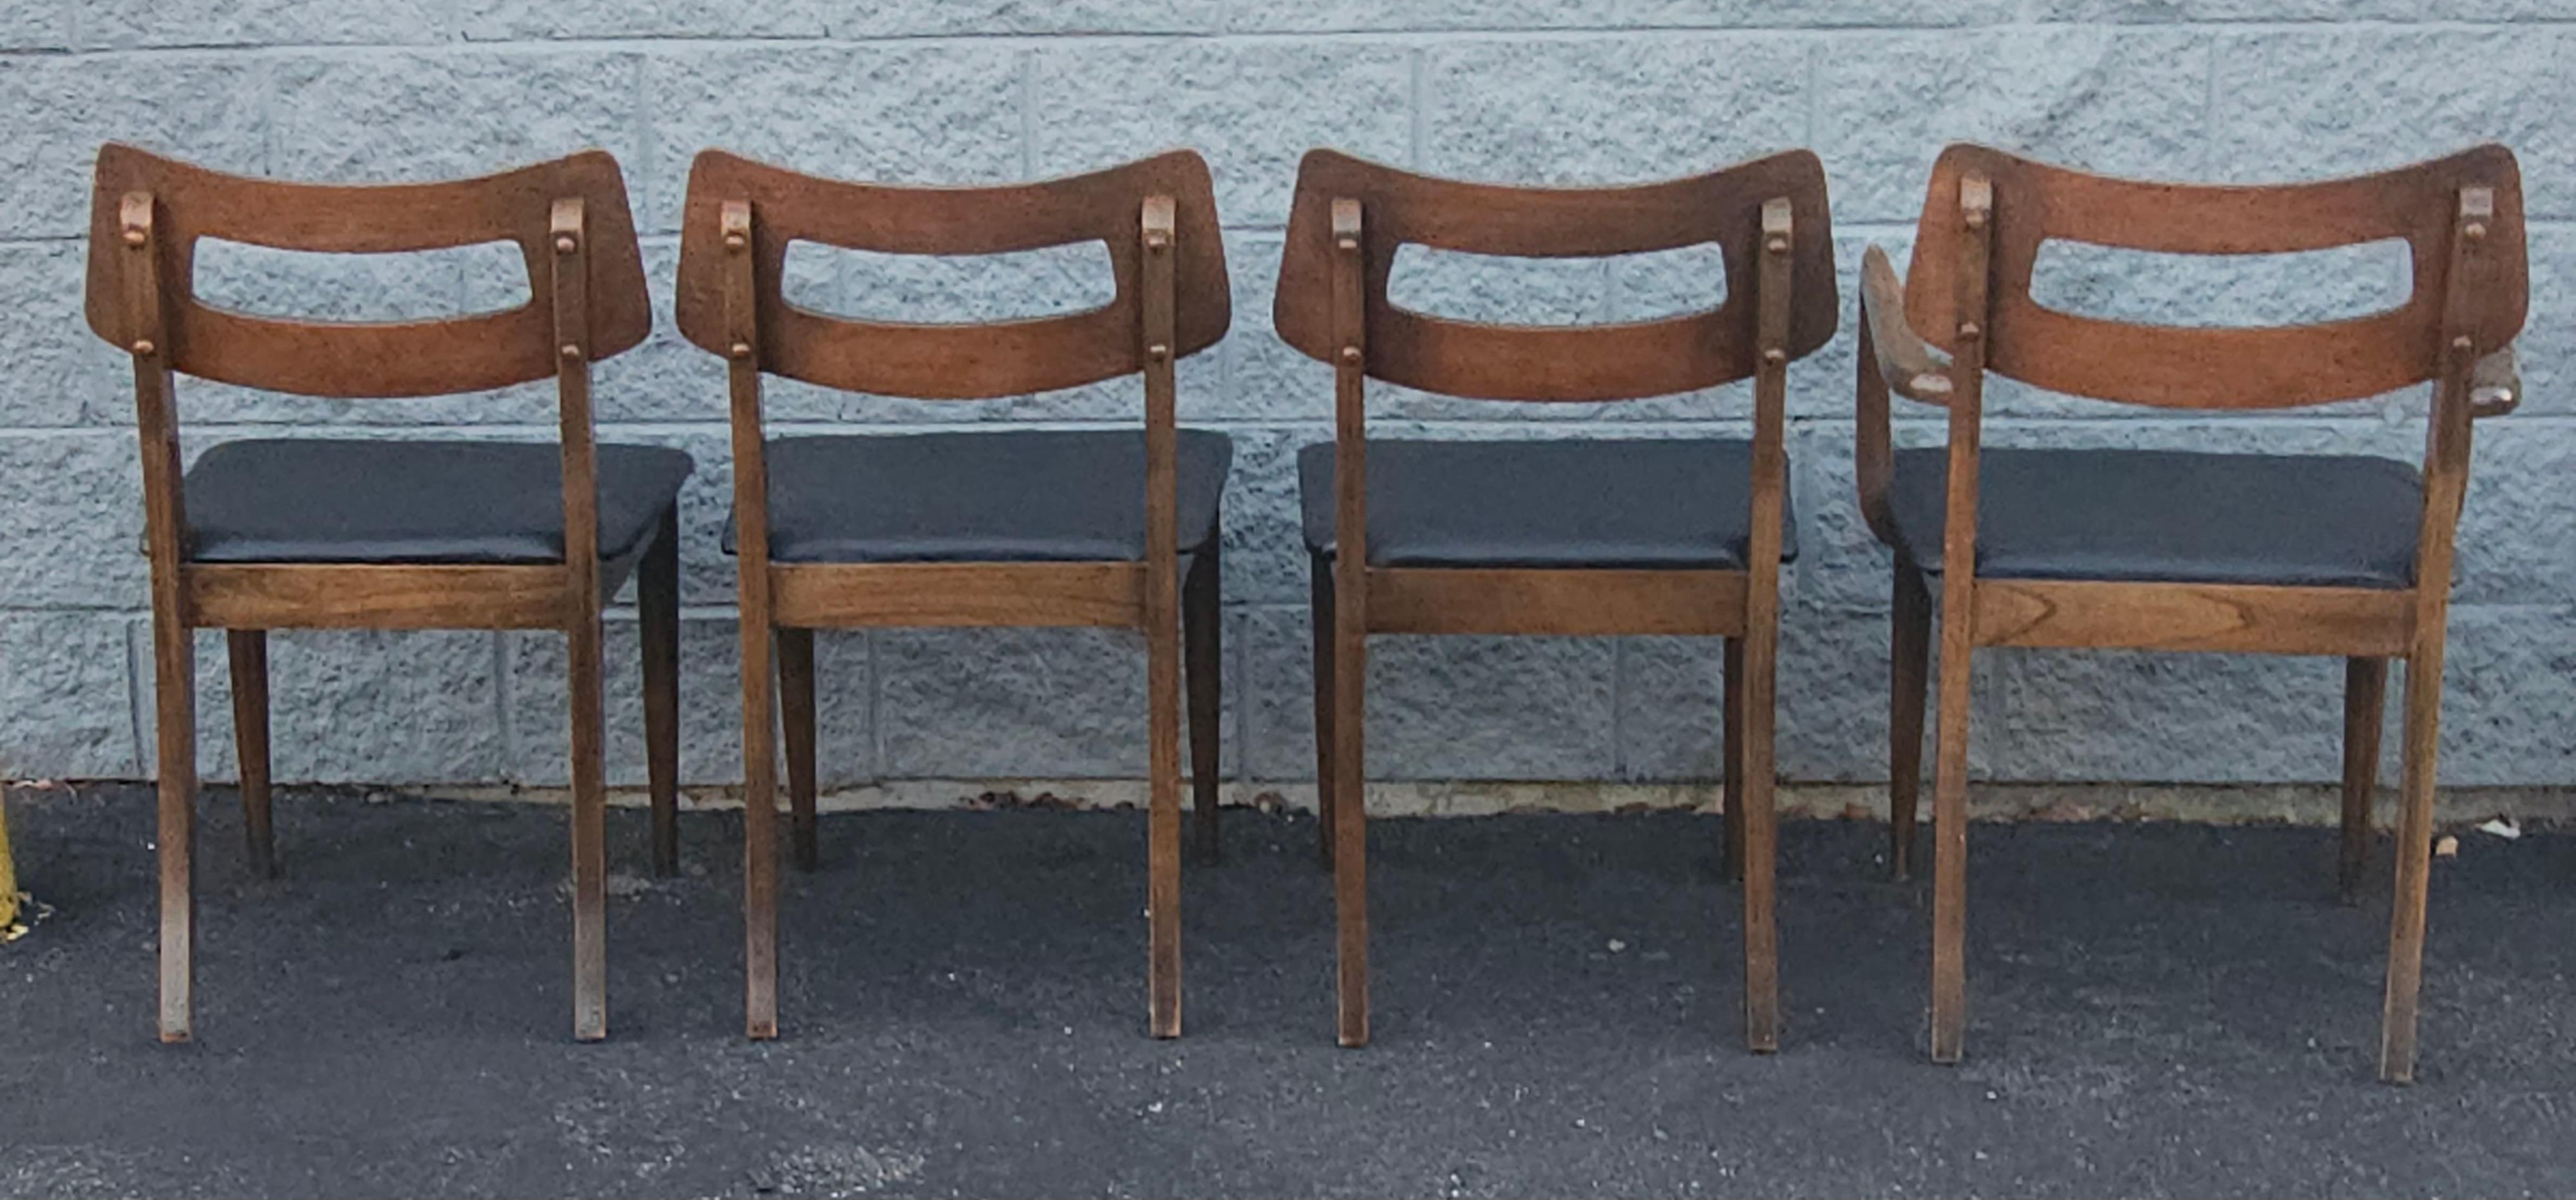 Hand-Crafted Set of 4 Mid Century Walnut and Vinyl Seat Upholstered Chairs For Sale